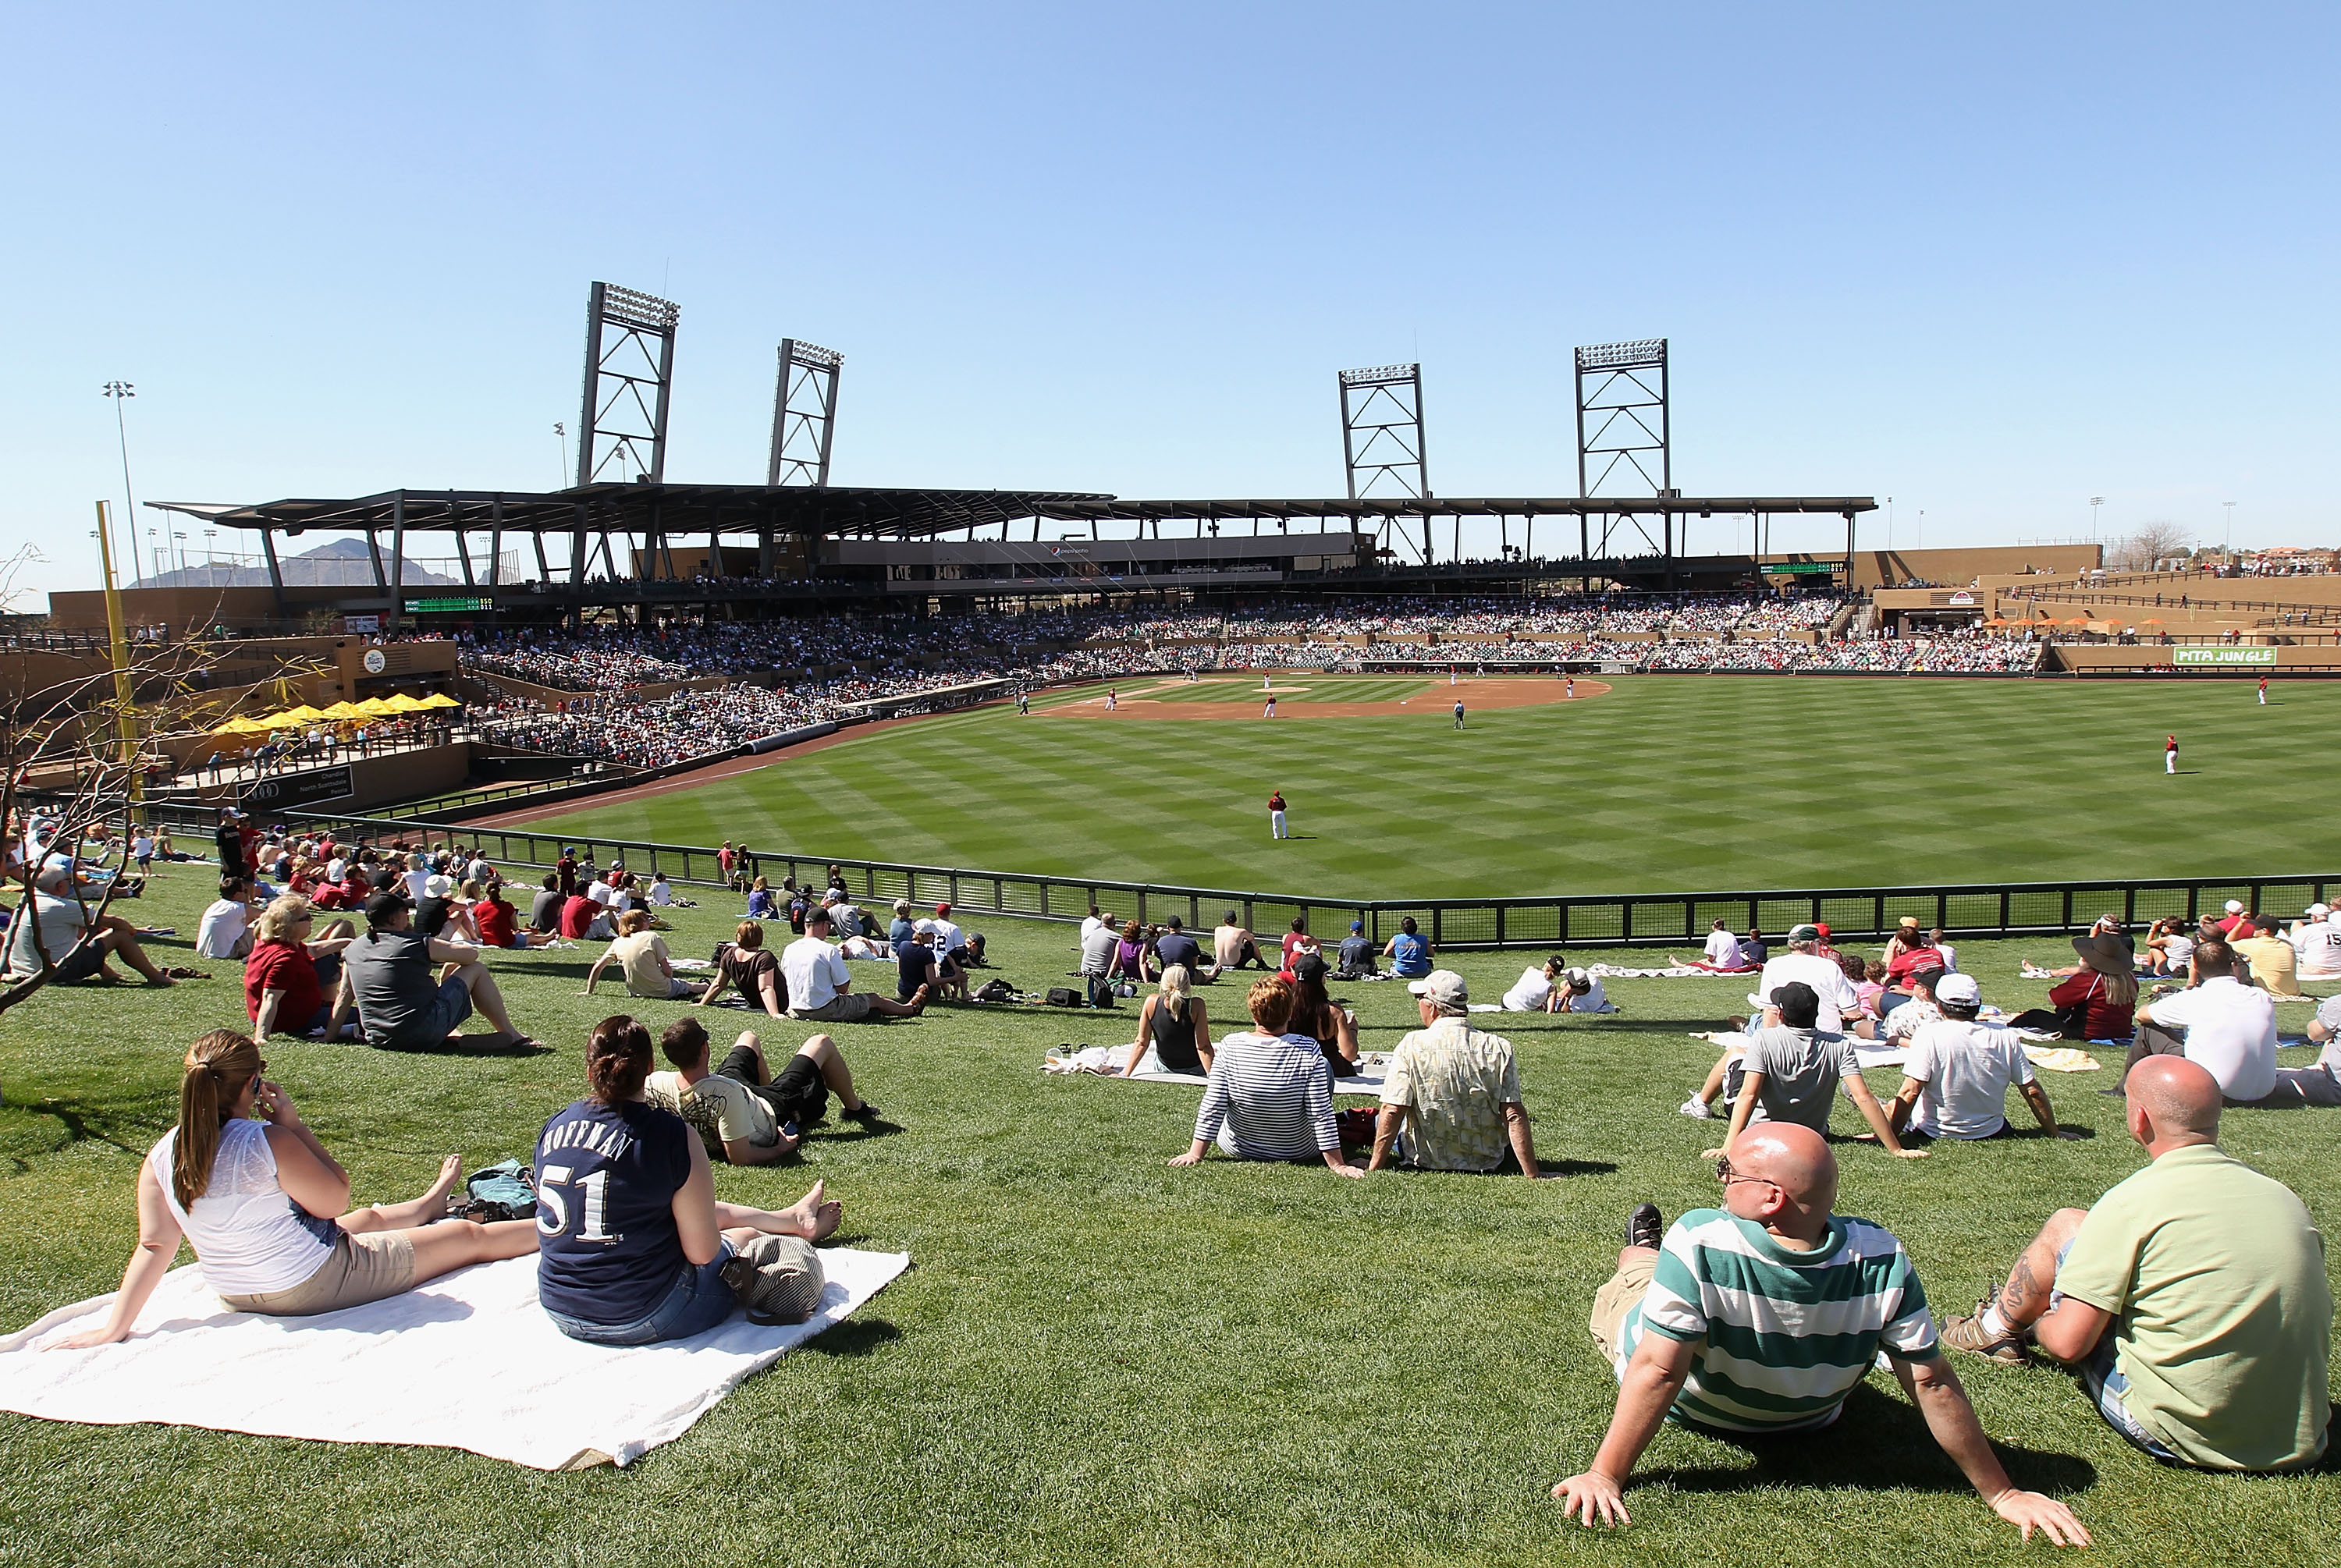 SCOTTSDALE, AZ - MARCH 09:  Fans watch the spring training game between the Milwaukee Brewers and the Arizona Diamondbacks at Salt River Fields at Talking Stick on March 9, 2011 in Scottsdale, Arizona.  (Photo by Christian Petersen/Getty Images)